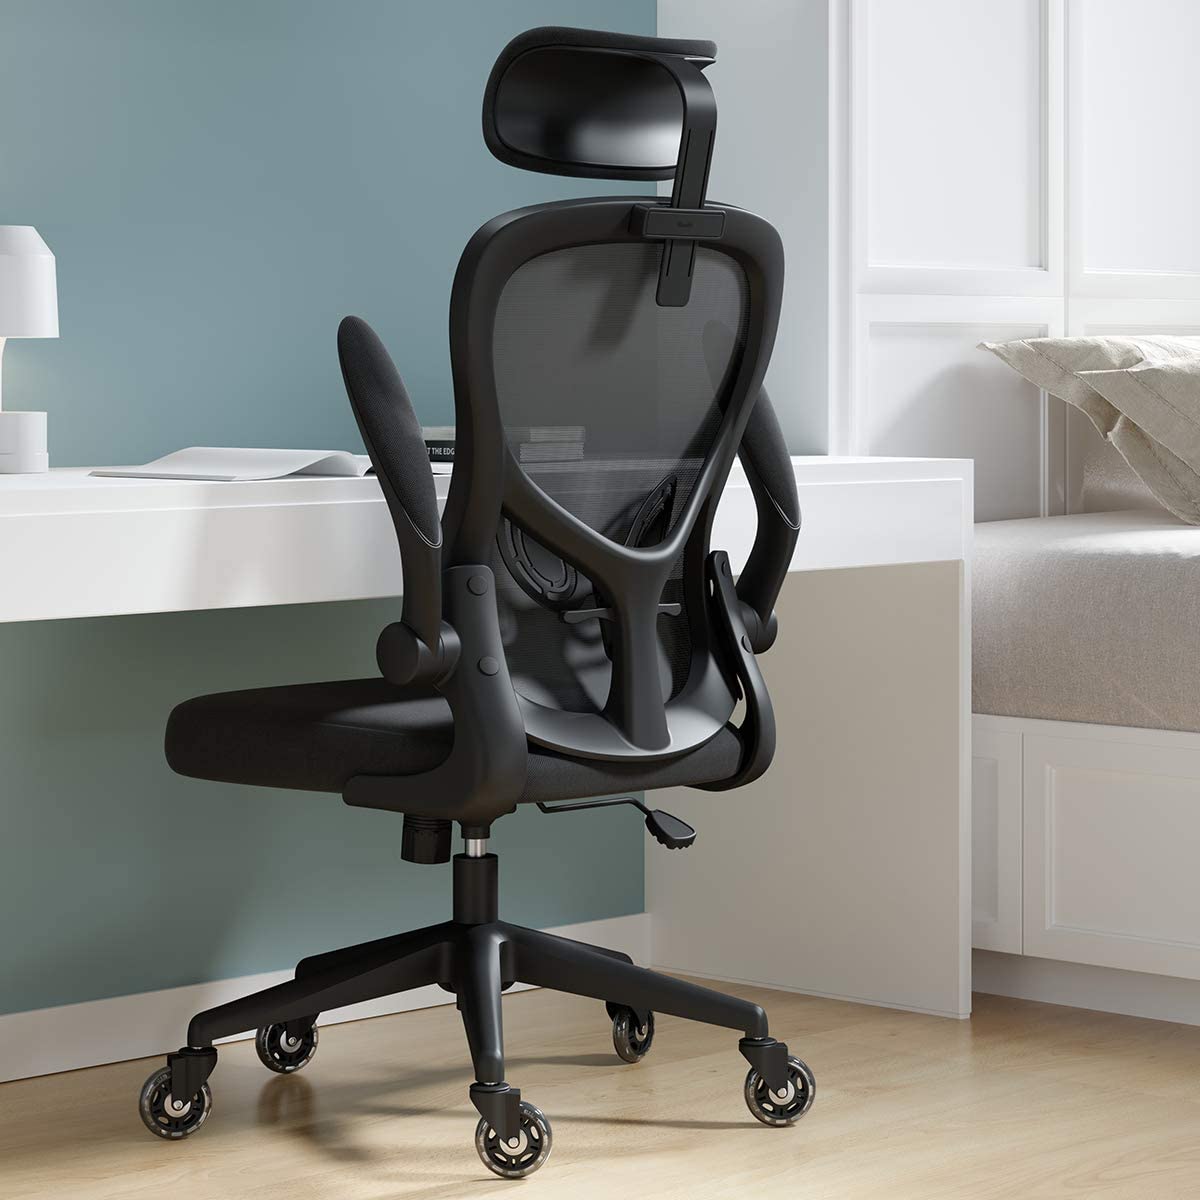 Hbada Office Chair, Home Ergonomic Desk Chair with Flip-up Arms 